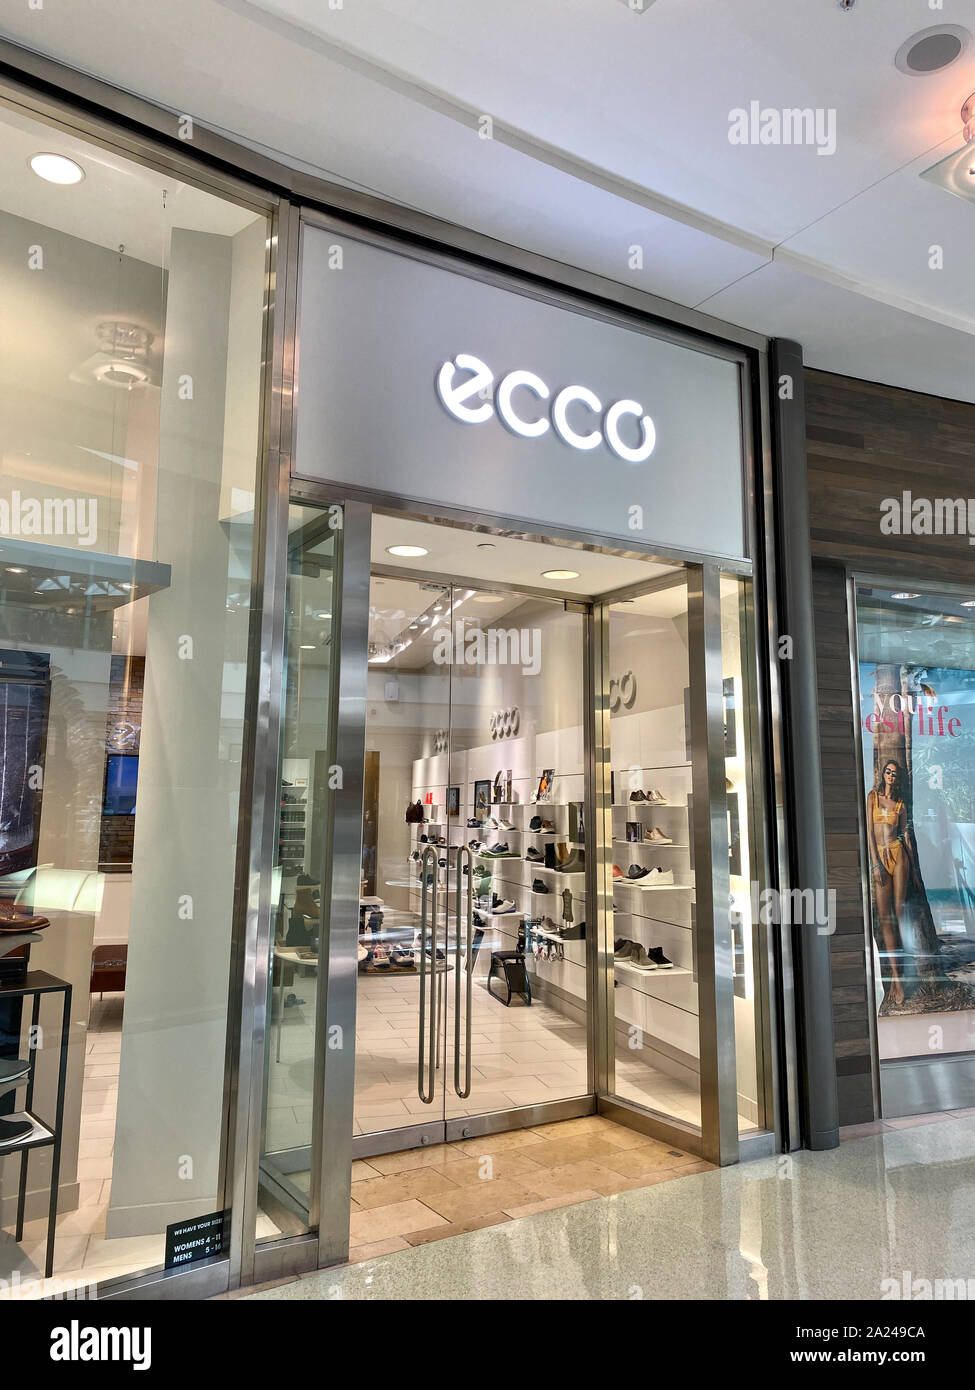 Orlando,FL/USA-9/30/19: An retail store in an indoor mall. ECCO is an international Danish shoe manufacturer and retailer Stock Photo - Alamy